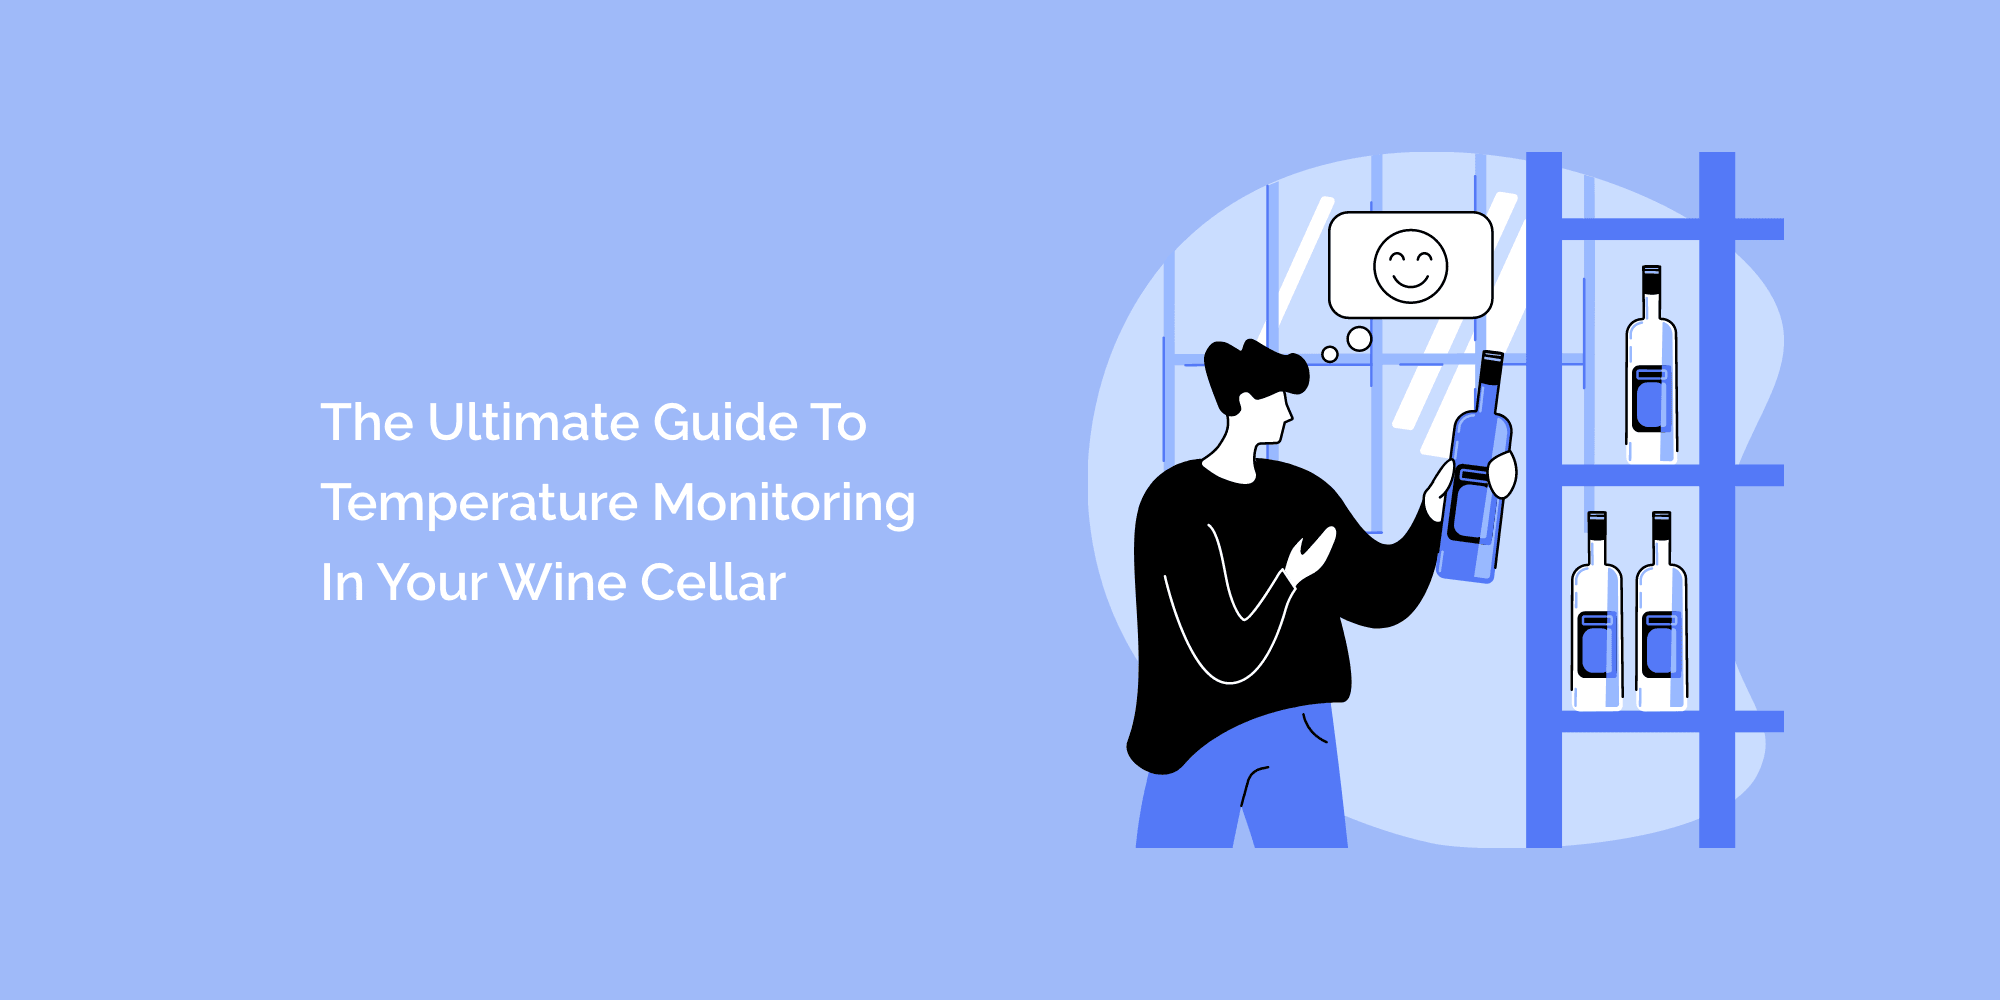 The Ultimate Guide to Temperature Monitoring in Your Wine Cellar